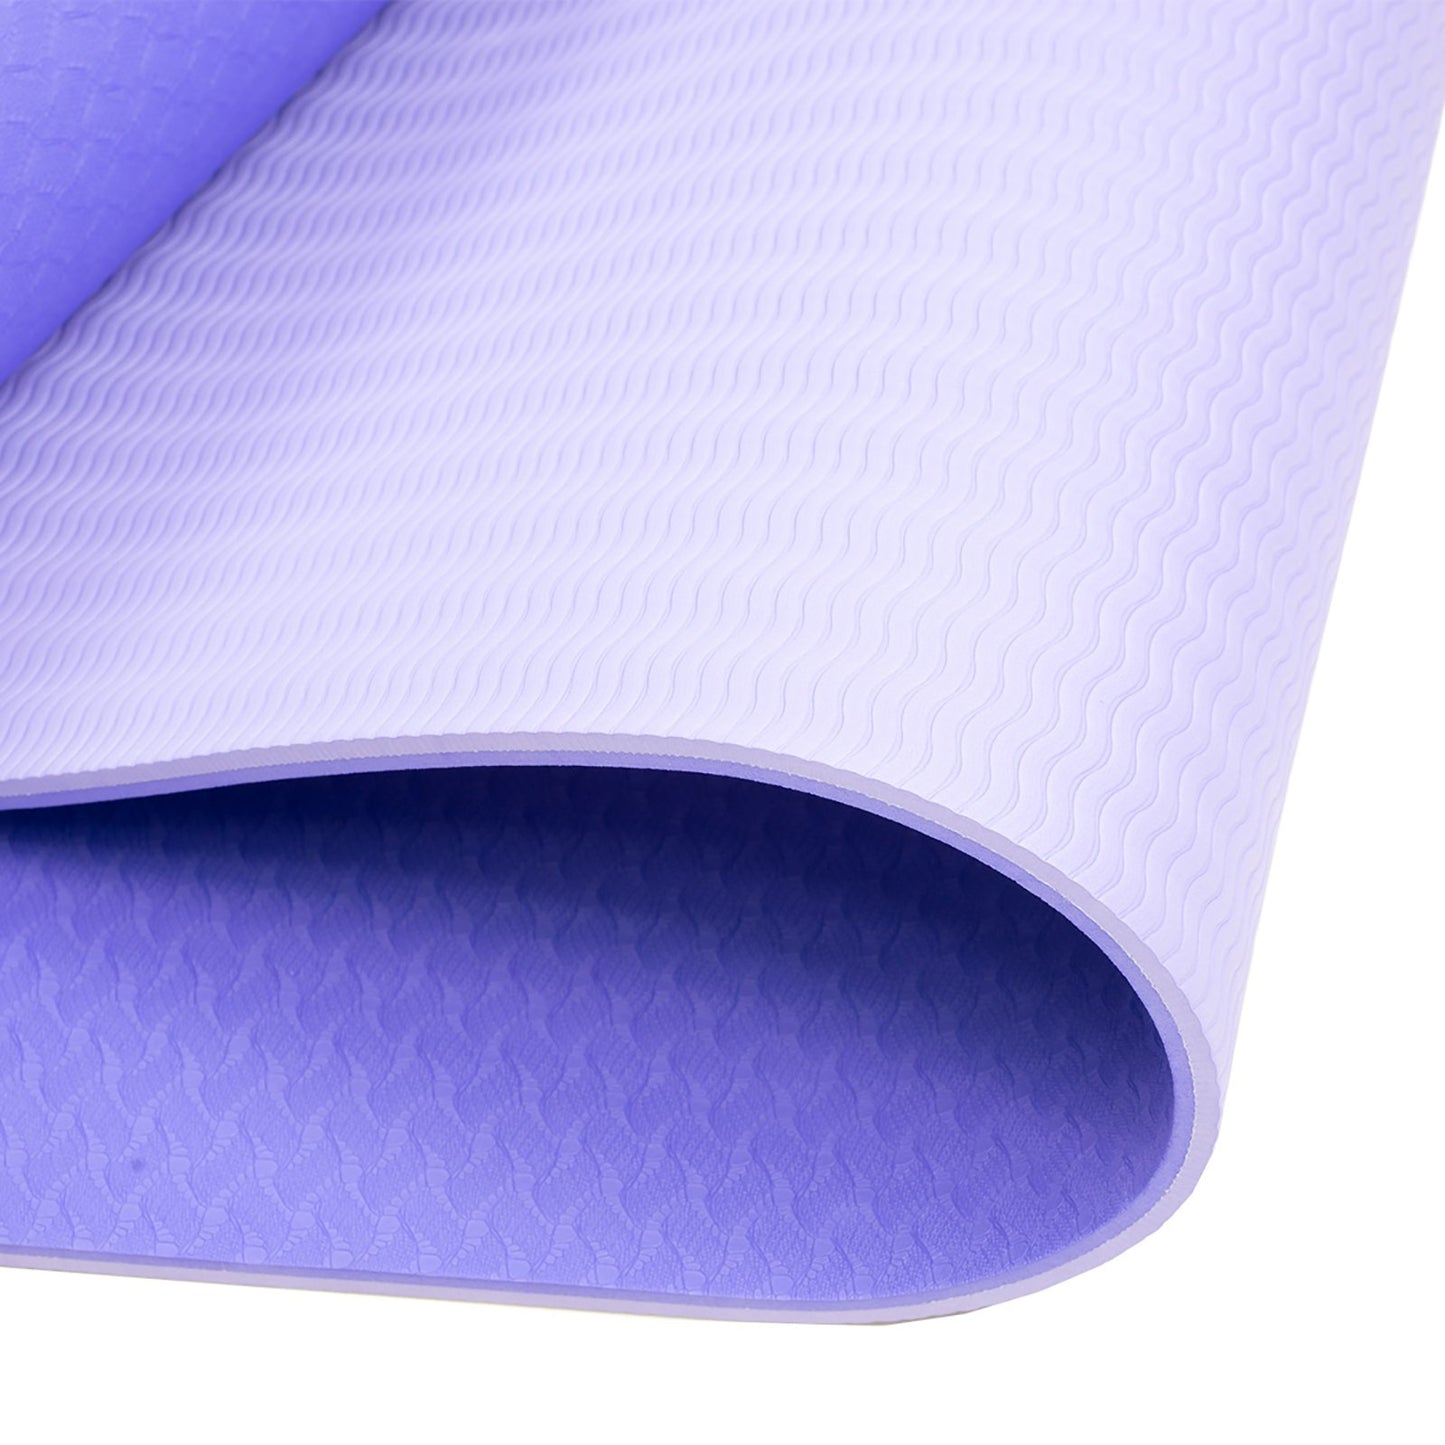 Powertrain Eco-friendly Dual Layer 8mm Yoga Mat | Light Purple | Non-slip Surface And Carry Strap For Ultimate Comfort And Portability